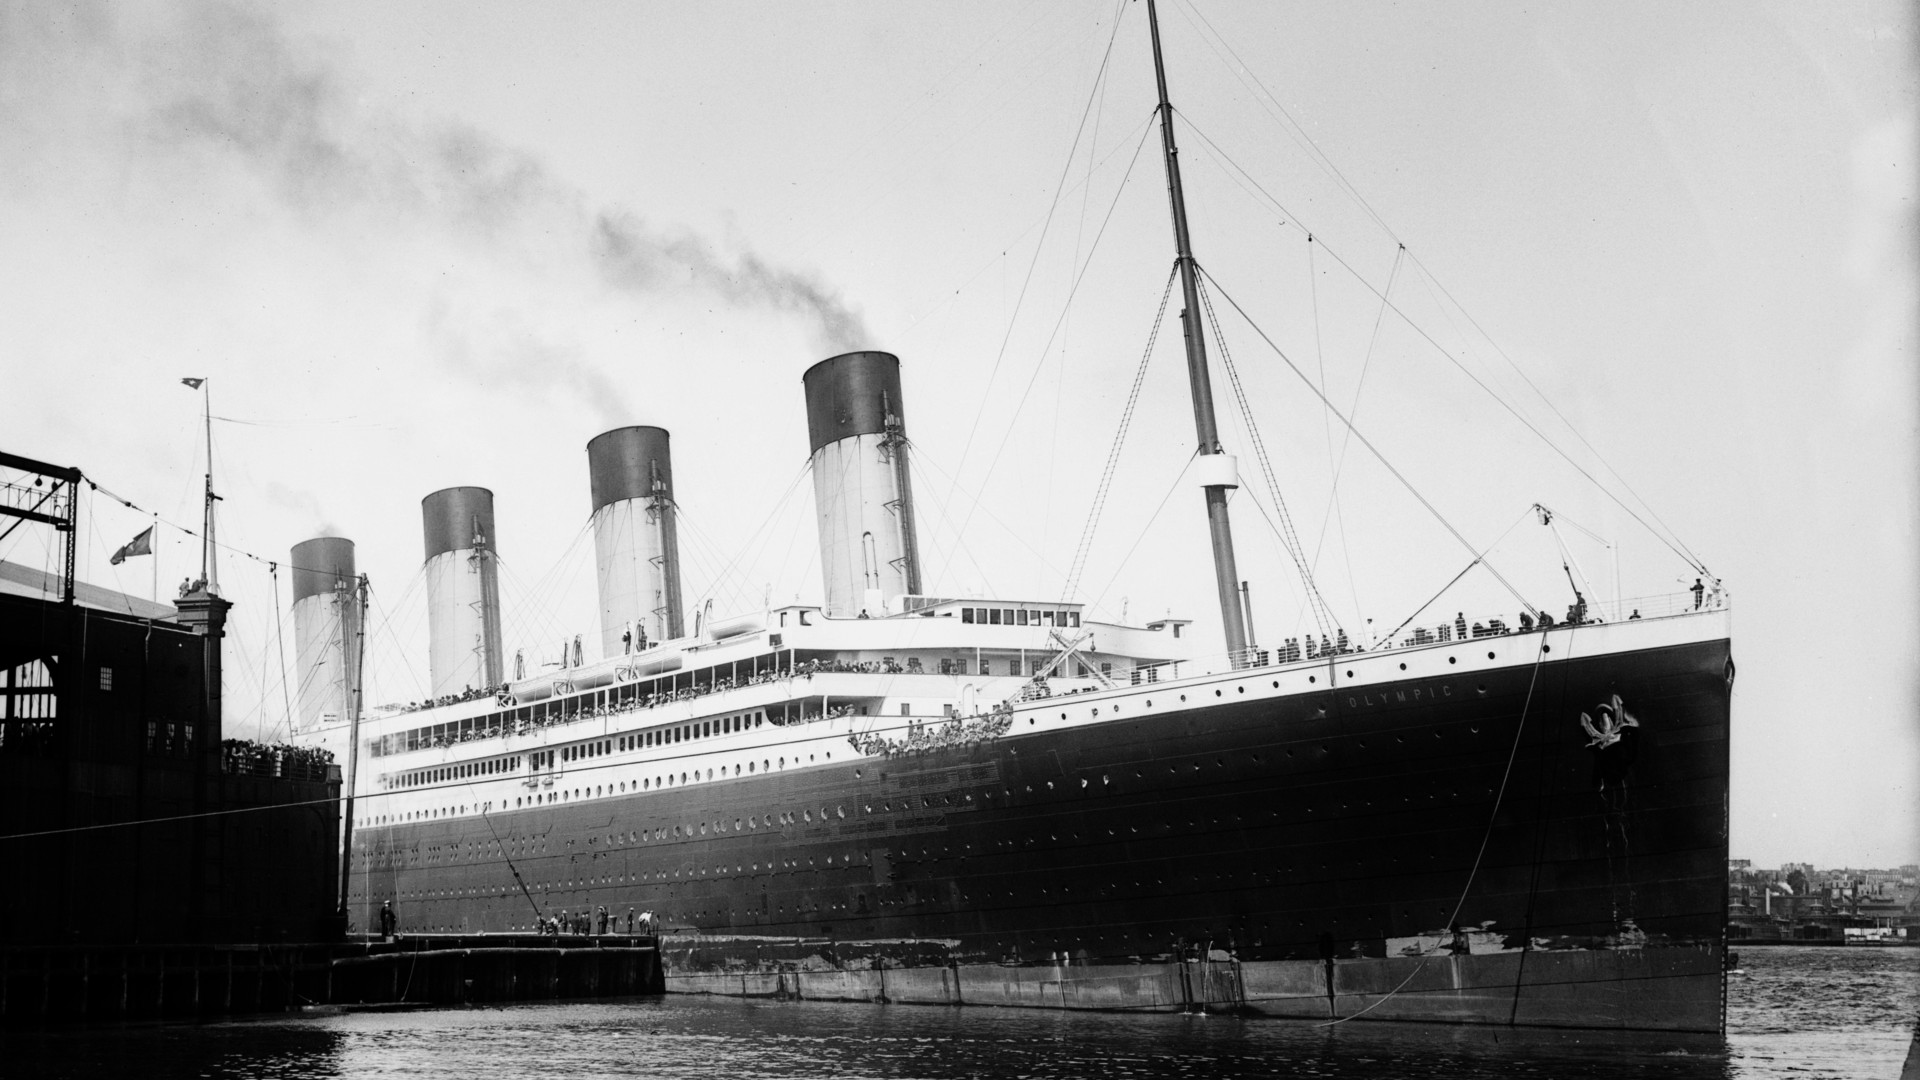 3 Rms Titanic HD Wallpapers | Backgrounds - Wallpaper Abyss